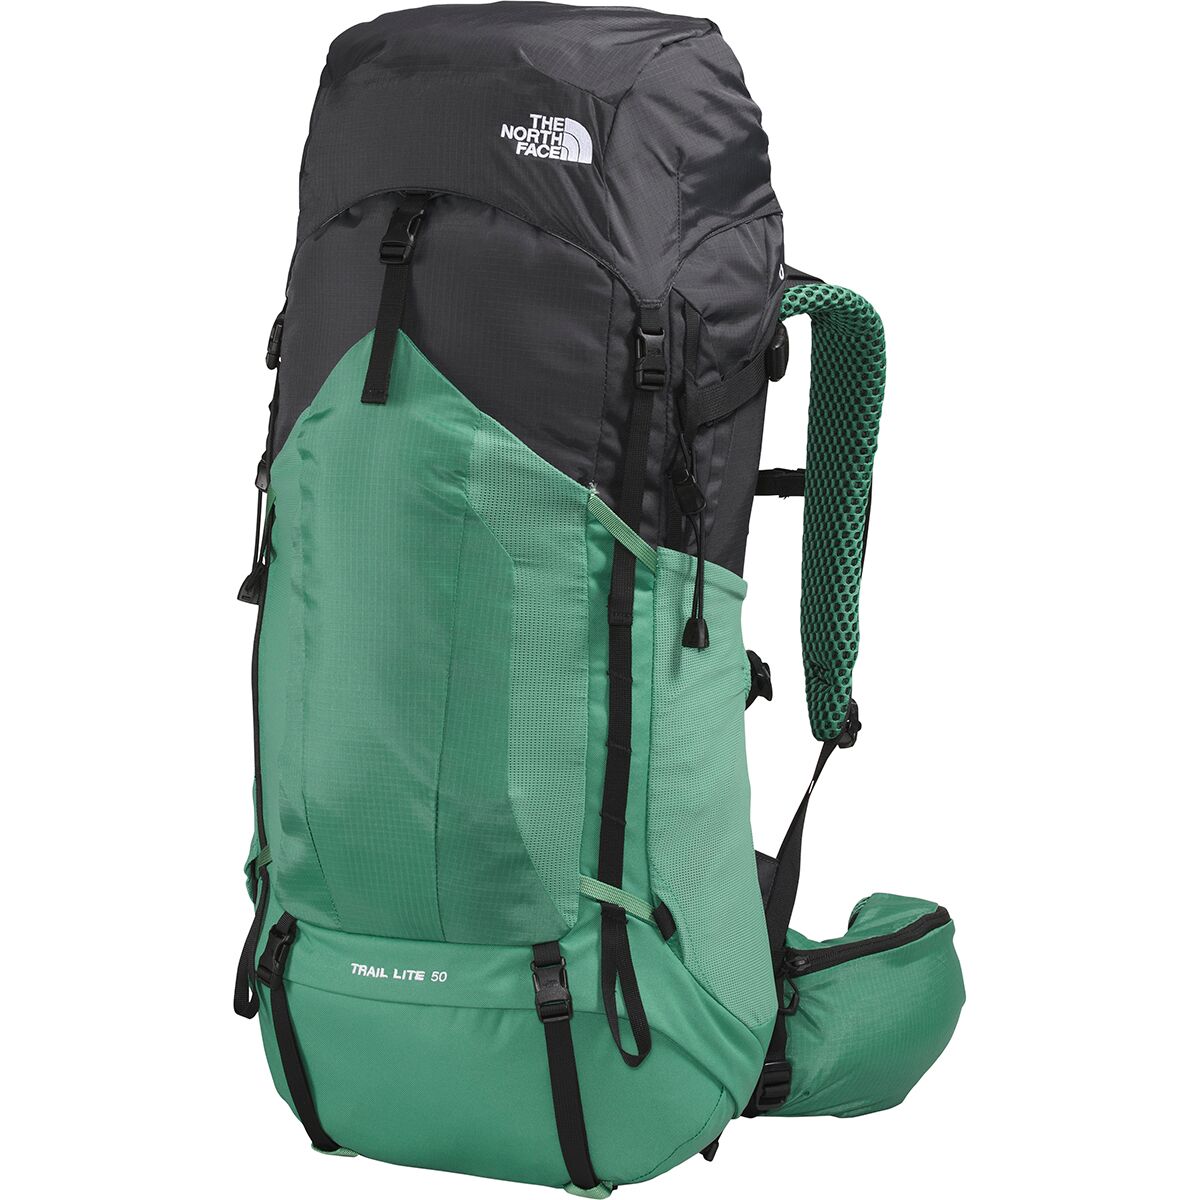 The North Face GR Series